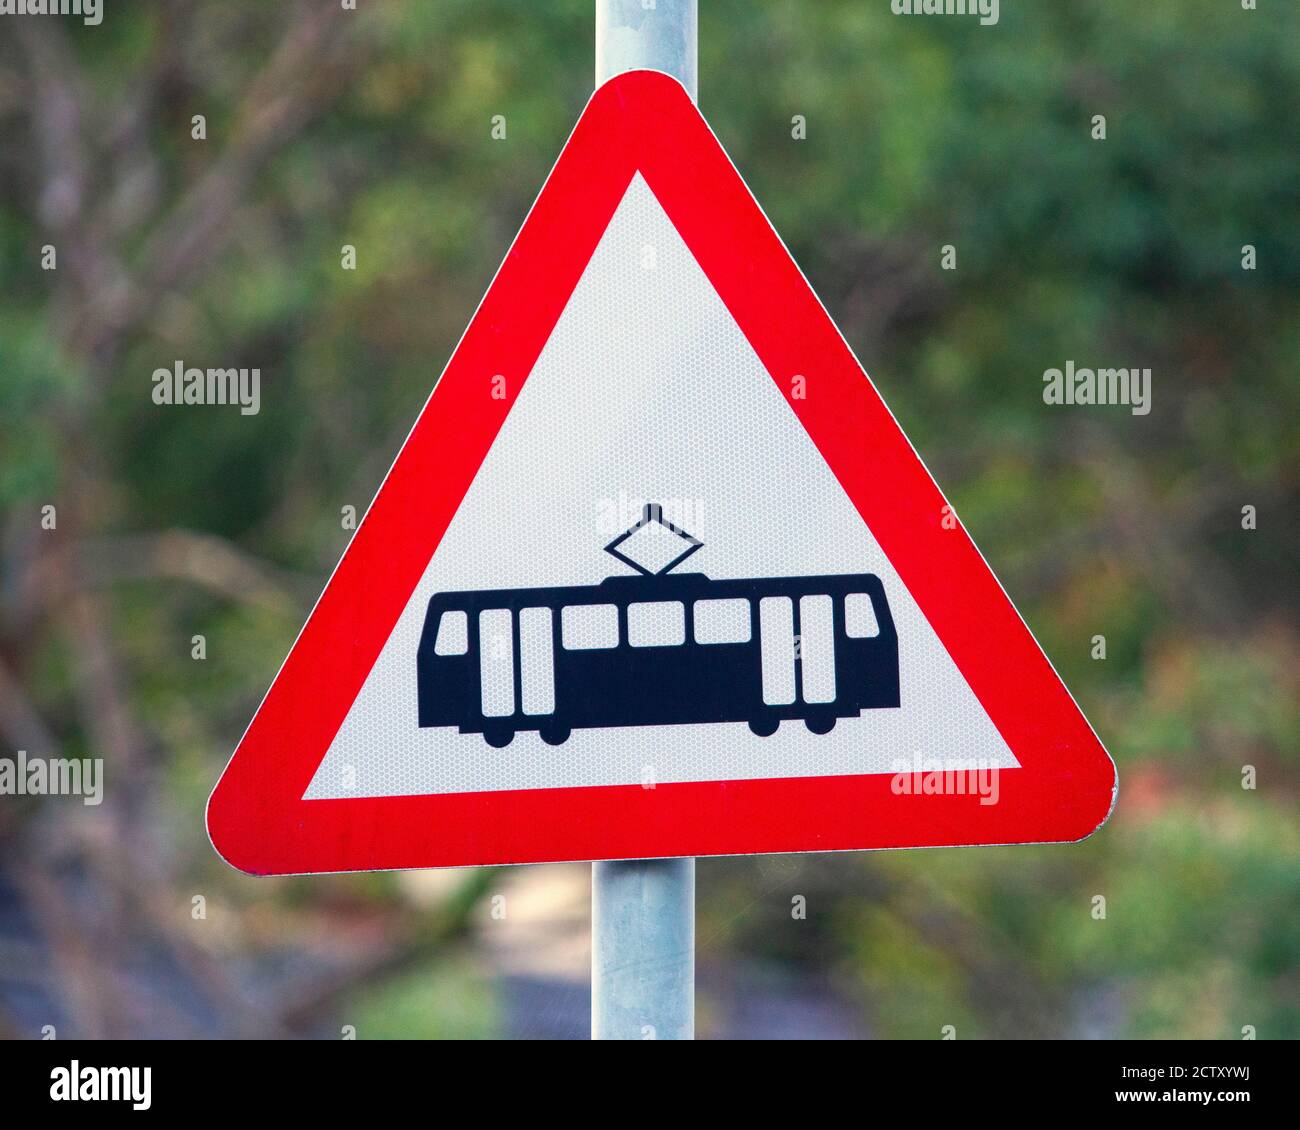 A sign at a Tram crossing - which is known as the Great Orme Tramway, in the seaside town of Llandudno in North Wales, UK. Stock Photo